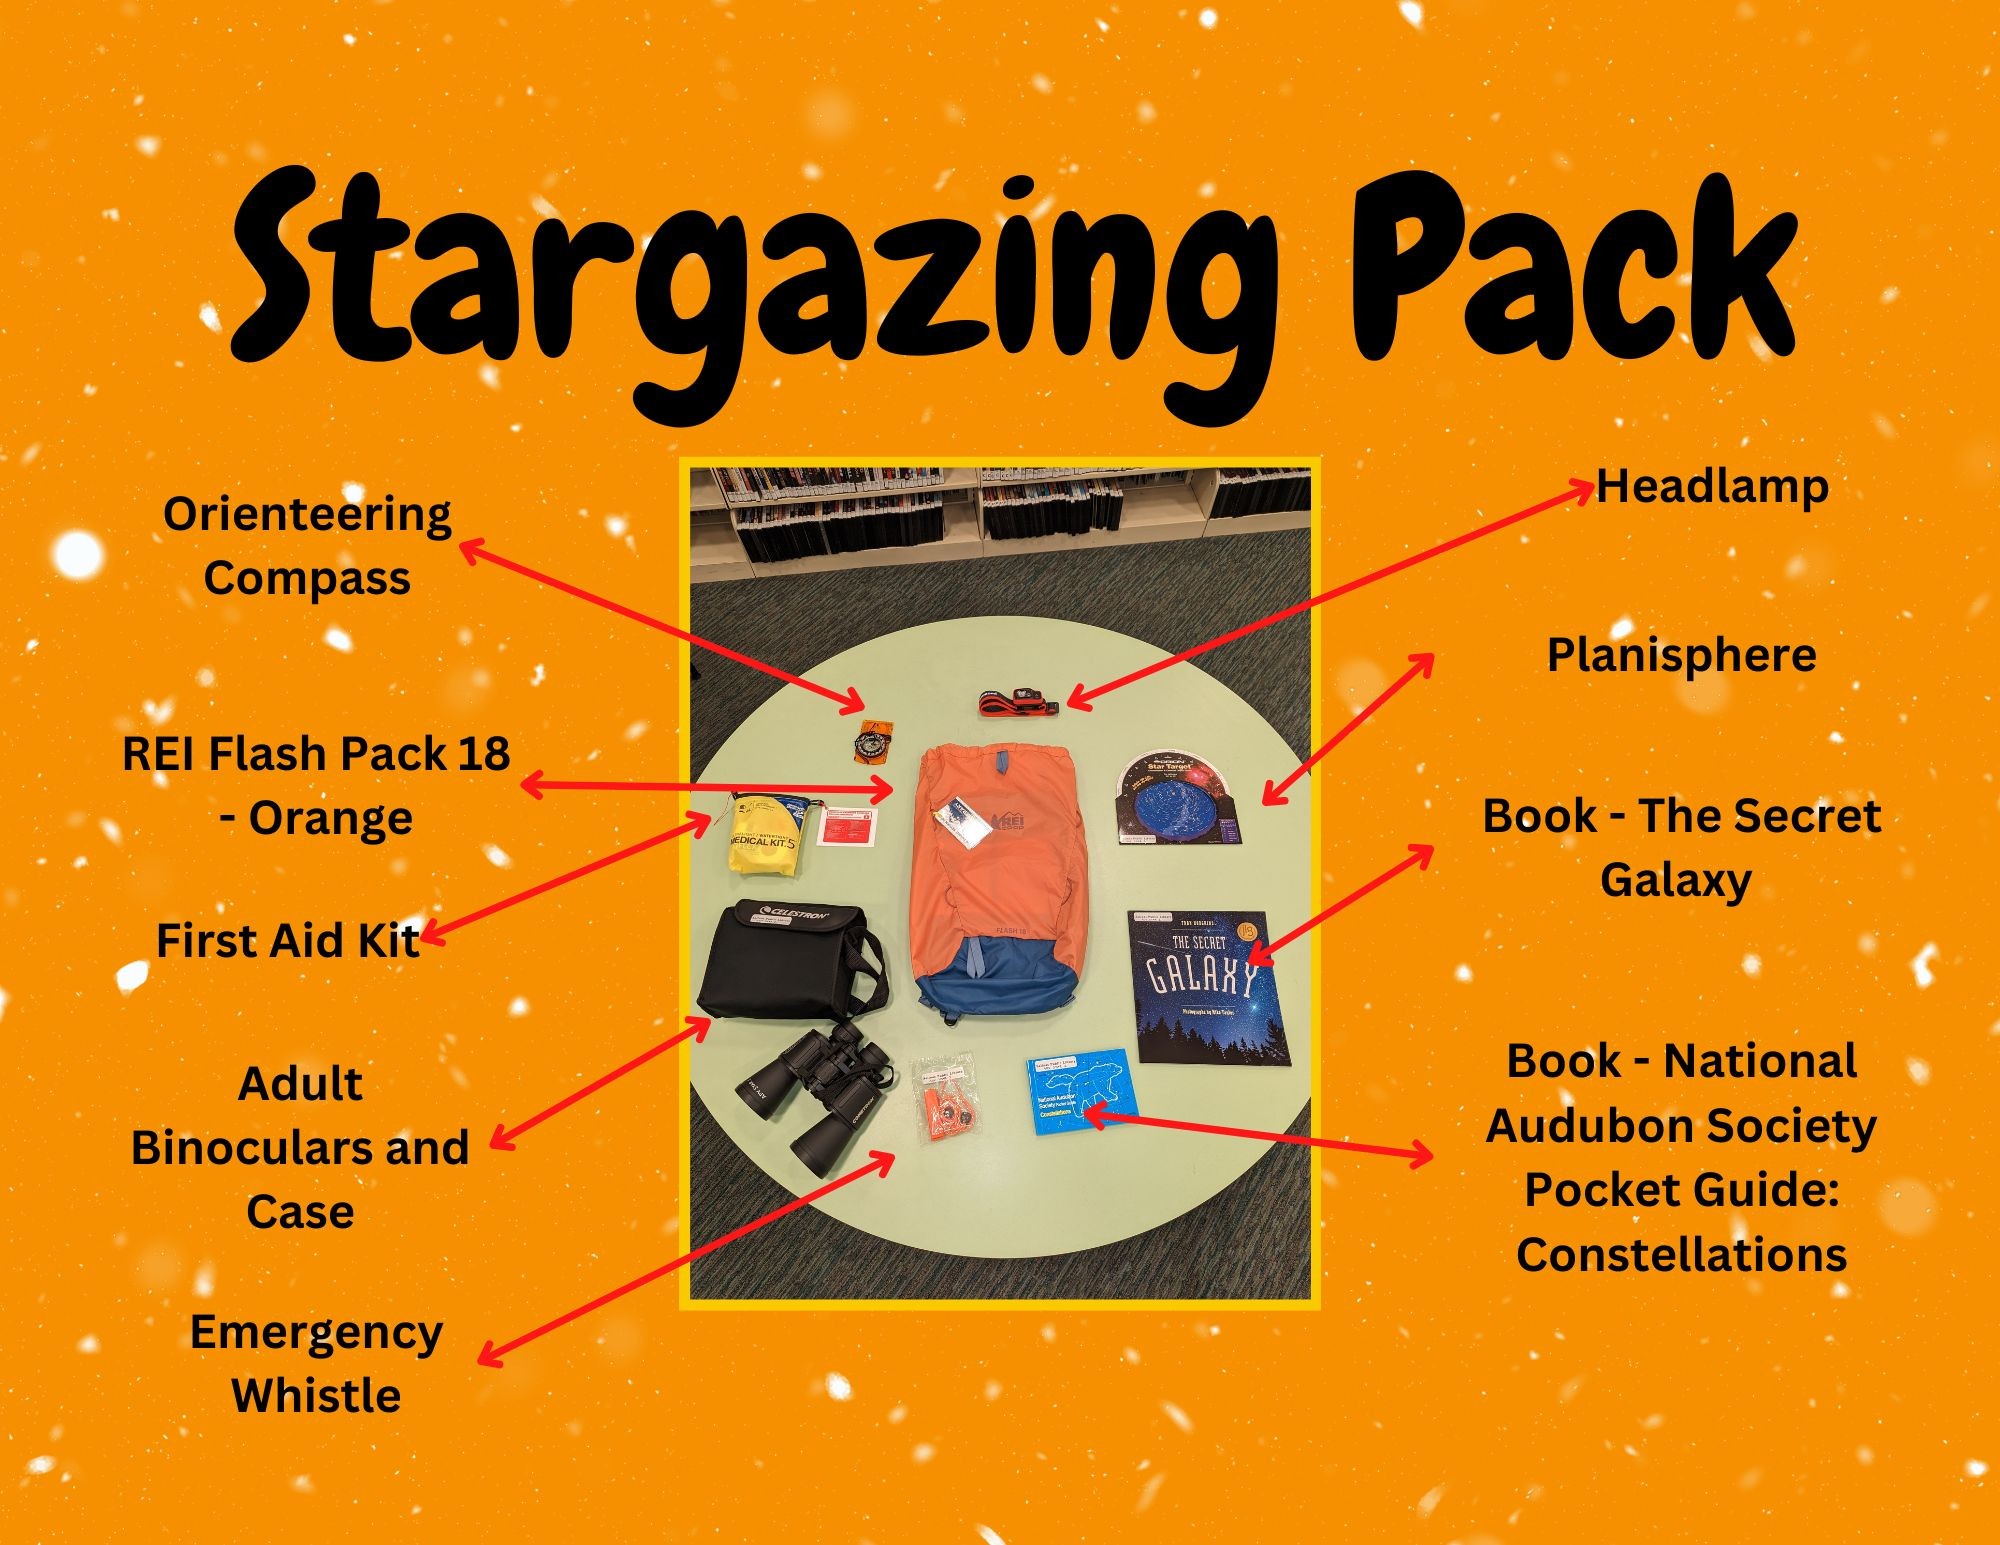 Contents of Stargazing Pack